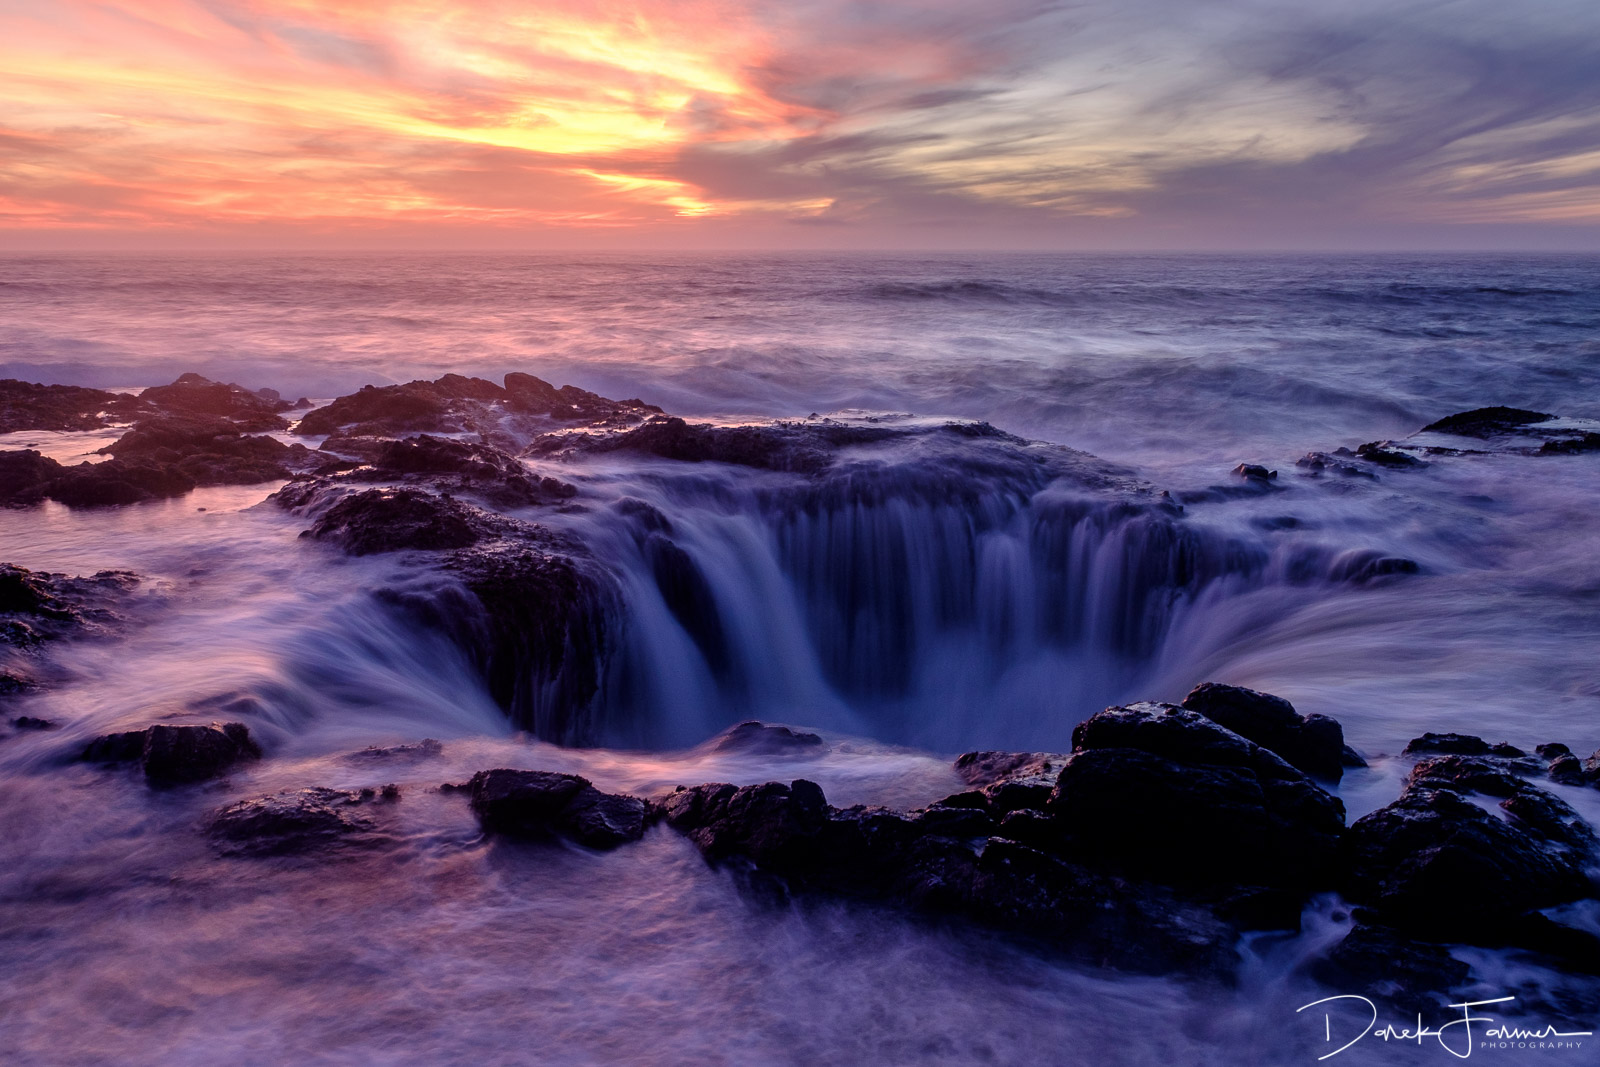 Thor’s Well: The Mysterious Hole Draining The Pacific Ocean